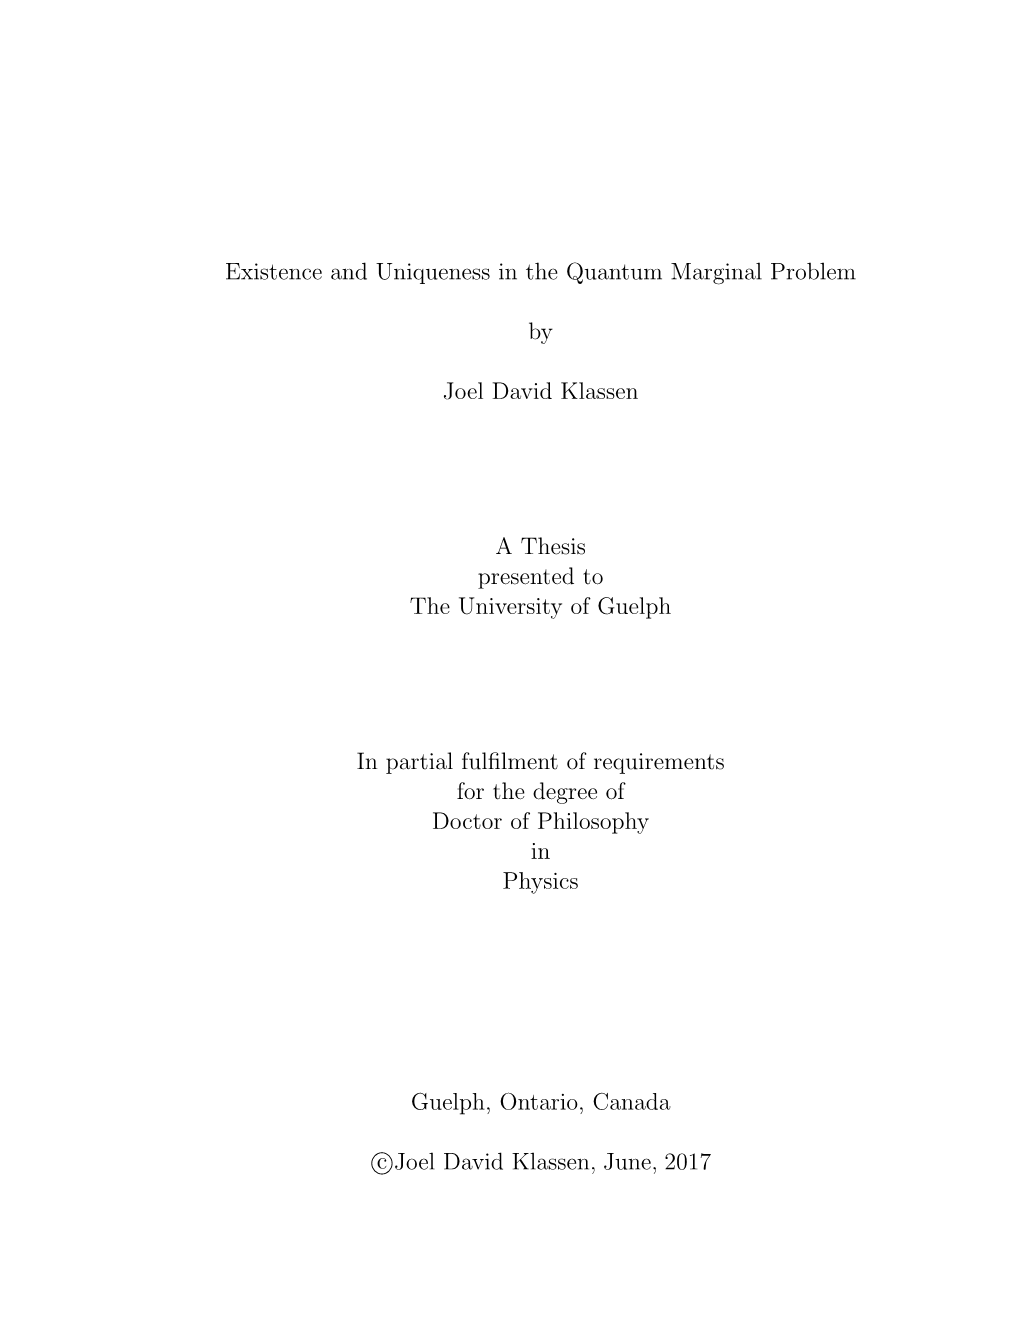 Existence and Uniqueness in the Quantum Marginal Problem by Joel